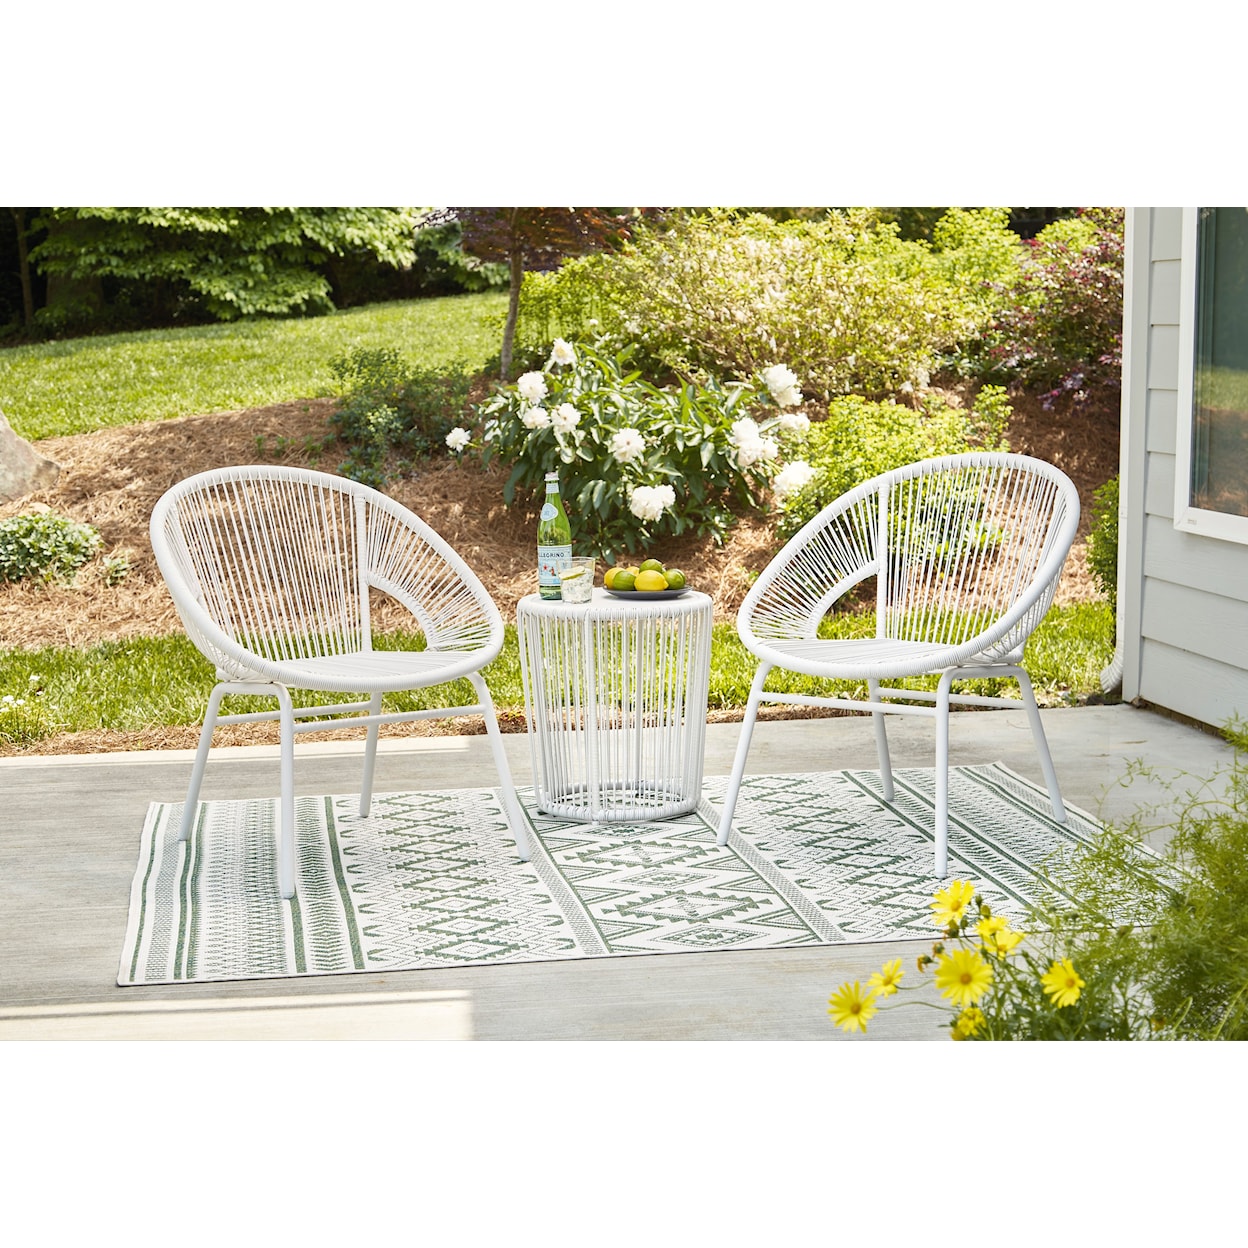 Ashley Furniture Signature Design Mandarin Cape Outdoor Table and Chairs (Set of 3)